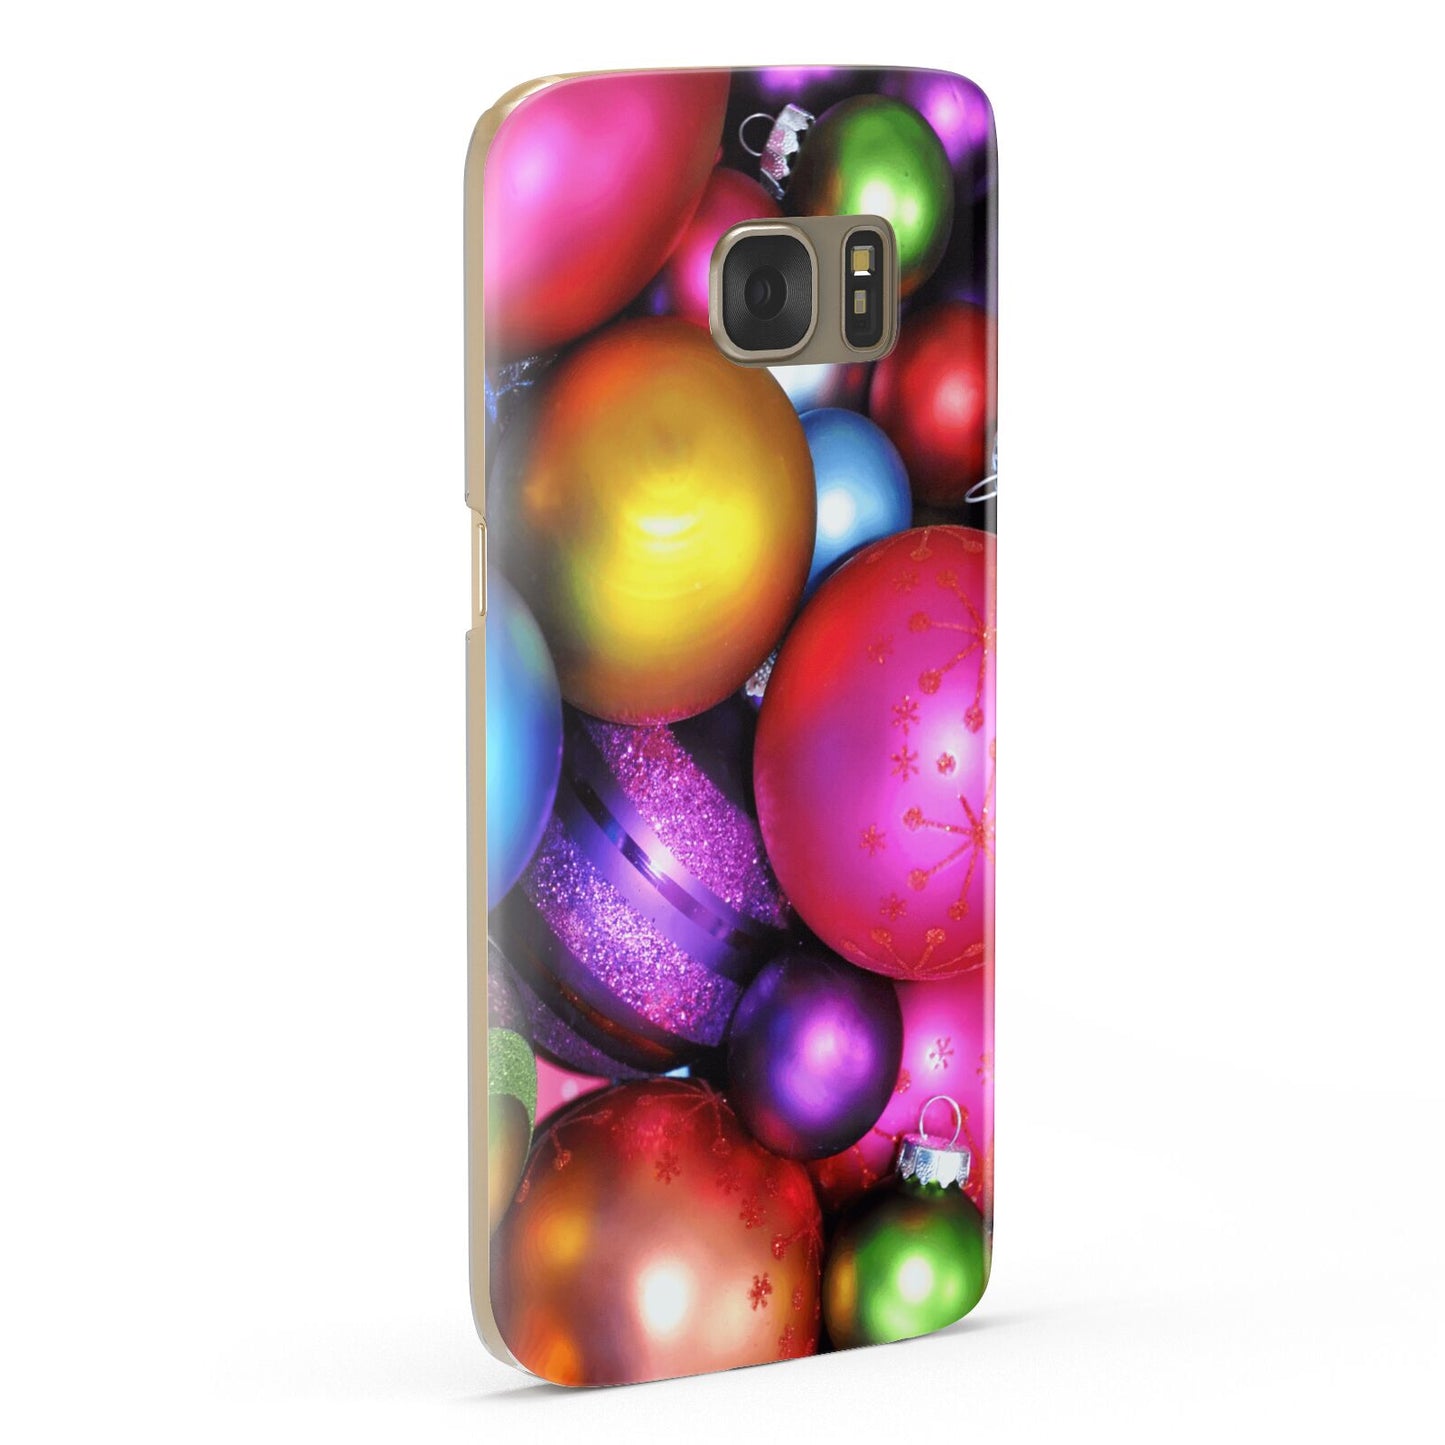 Bauble Samsung Galaxy Case Fourty Five Degrees